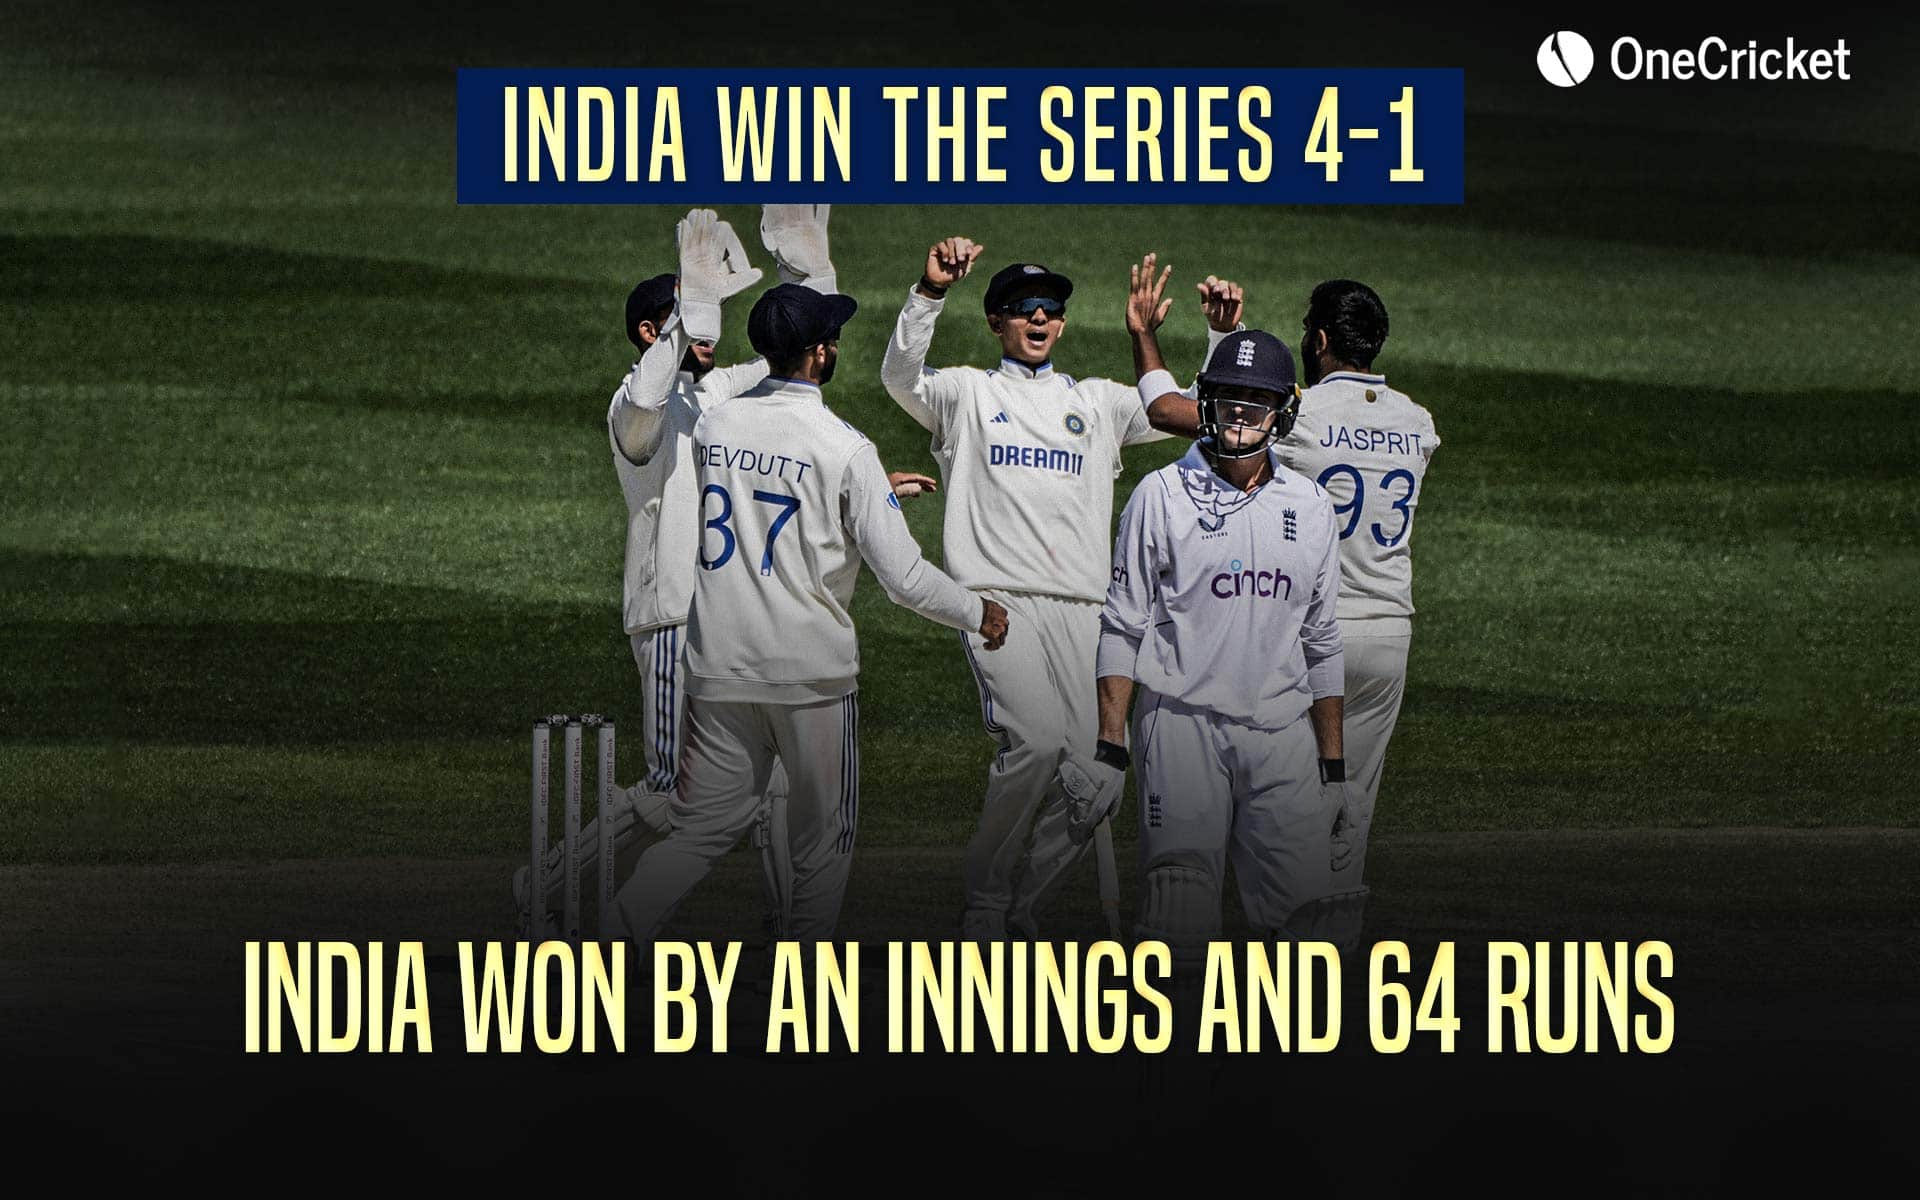 India registered a series victory by 4-1 (Source: OneCricket)